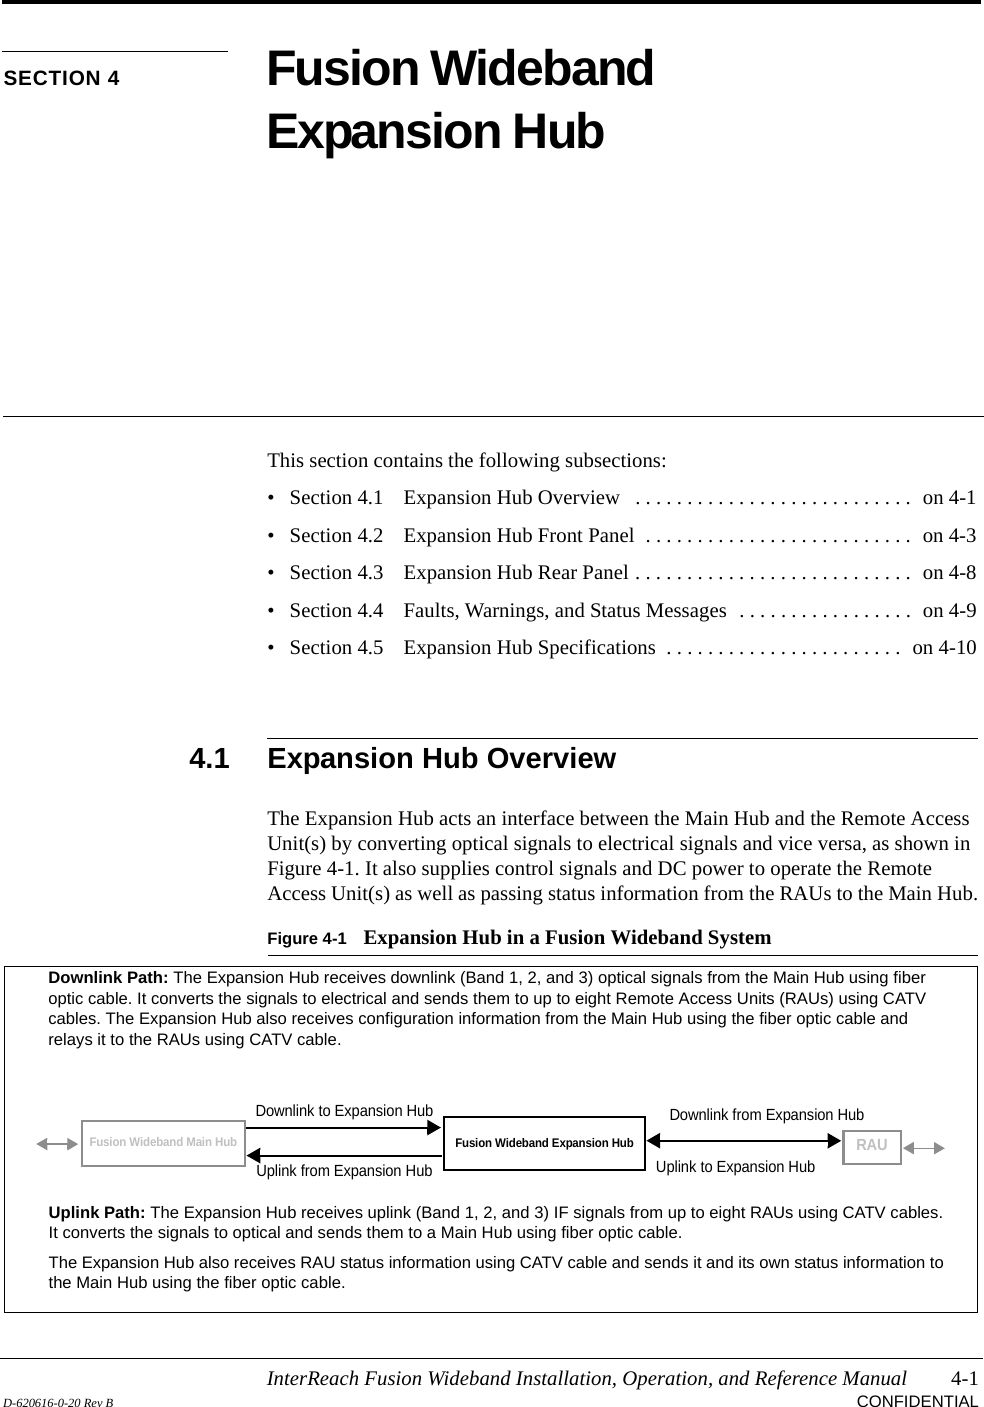 InterReach Fusion Wideband Installation, Operation, and Reference Manual 4-1D-620616-0-20 Rev B CONFIDENTIALSECTION 4 Fusion Wideband Expansion HubThis section contains the following subsections:• Section 4.1   Expansion Hub Overview   . . . . . . . . . . . . . . . . . . . . . . . . . . .  on 4-1• Section 4.2   Expansion Hub Front Panel  . . . . . . . . . . . . . . . . . . . . . . . . . .  on 4-3• Section 4.3   Expansion Hub Rear Panel . . . . . . . . . . . . . . . . . . . . . . . . . . .  on 4-8• Section 4.4   Faults, Warnings, and Status Messages  . . . . . . . . . . . . . . . . .  on 4-9• Section 4.5   Expansion Hub Specifications  . . . . . . . . . . . . . . . . . . . . . . .  on 4-104.1 Expansion Hub OverviewThe Expansion Hub acts an interface between the Main Hub and the Remote Access Unit(s) by converting optical signals to electrical signals and vice versa, as shown in Figure 4-1. It also supplies control signals and DC power to operate the Remote Access Unit(s) as well as passing status information from the RAUs to the Main Hub.Figure 4-1 Expansion Hub in a Fusion Wideband SystemFusion Wideband Expansion HubFusion Wideband Main HubRAUDownlink Path: The Expansion Hub receives downlink (Band 1, 2, and 3) optical signals from the Main Hub using fiber optic cable. It converts the signals to electrical and sends them to up to eight Remote Access Units (RAUs) using CATV cables. The Expansion Hub also receives configuration information from the Main Hub using the fiber optic cable and relays it to the RAUs using CATV cable.Uplink Path: The Expansion Hub receives uplink (Band 1, 2, and 3) IF signals from up to eight RAUs using CATV cables. It converts the signals to optical and sends them to a Main Hub using fiber optic cable.The Expansion Hub also receives RAU status information using CATV cable and sends it and its own status information to the Main Hub using the fiber optic cable.Downlink to Expansion HubUplink from Expansion HubDownlink from Expansion HubUplink to Expansion Hub